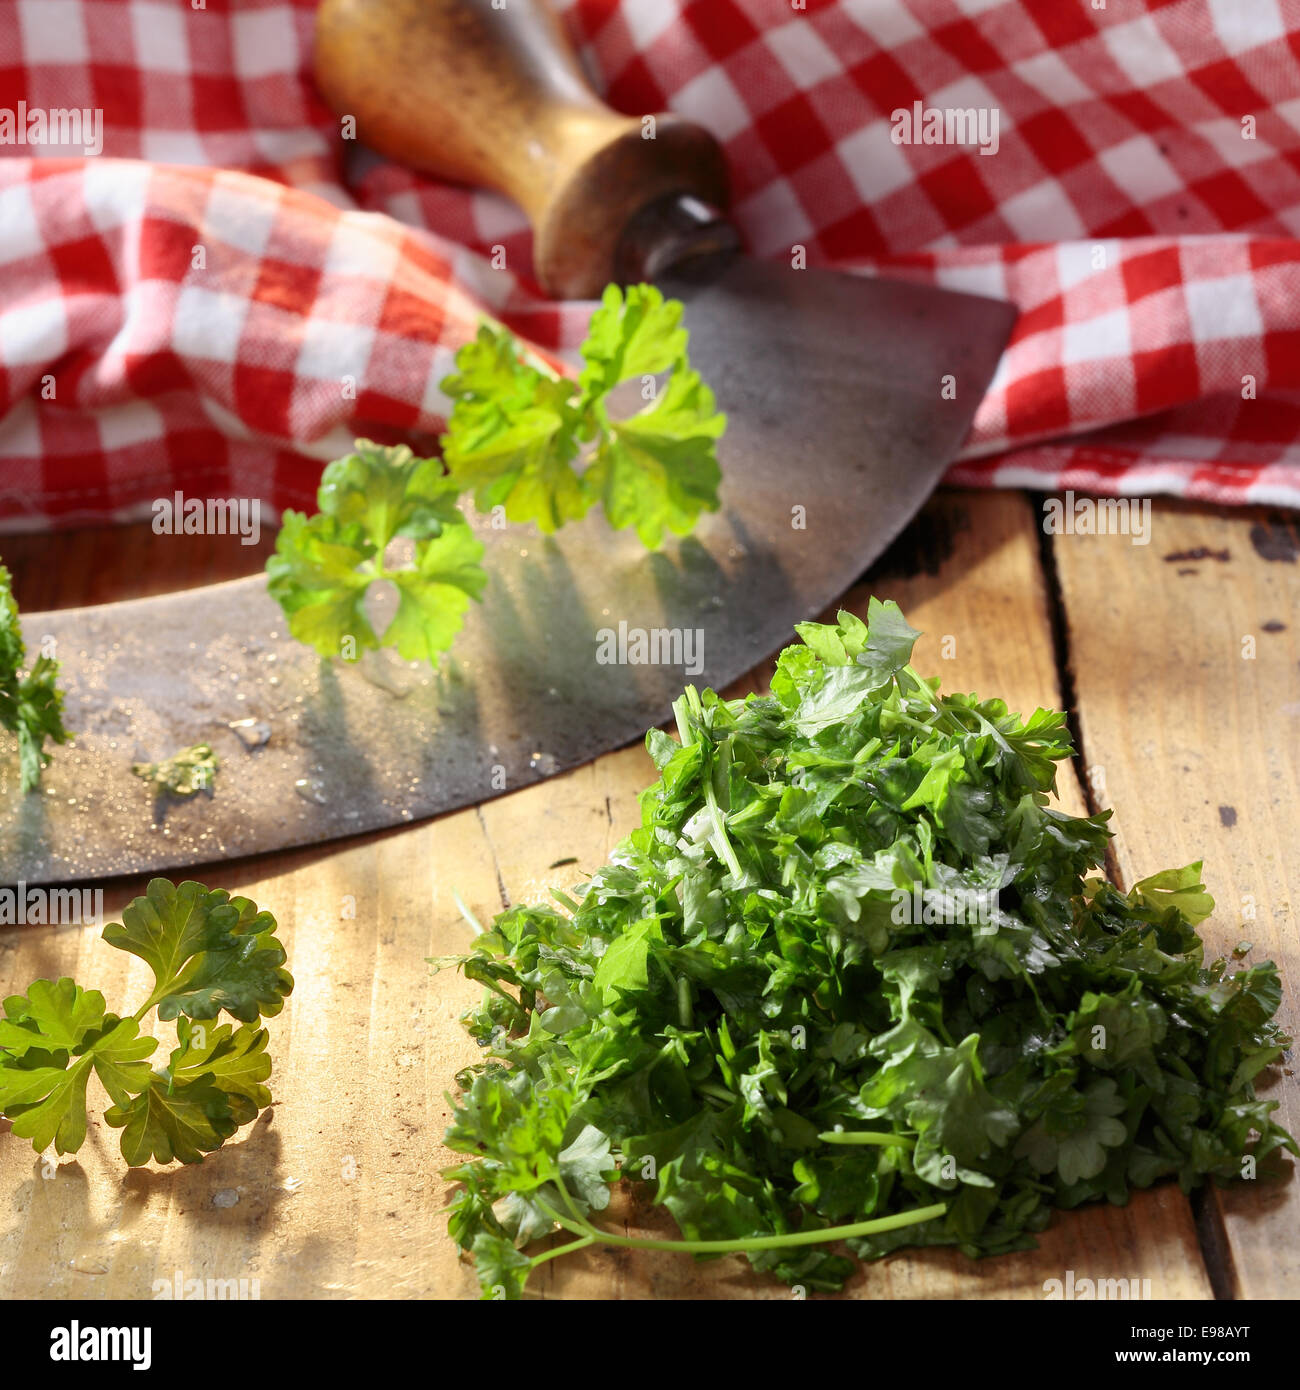 Chopping fresh green crinkly leaf parsley on a rustic wooden table using a curved stainless steel rocker blade knife Stock Photo